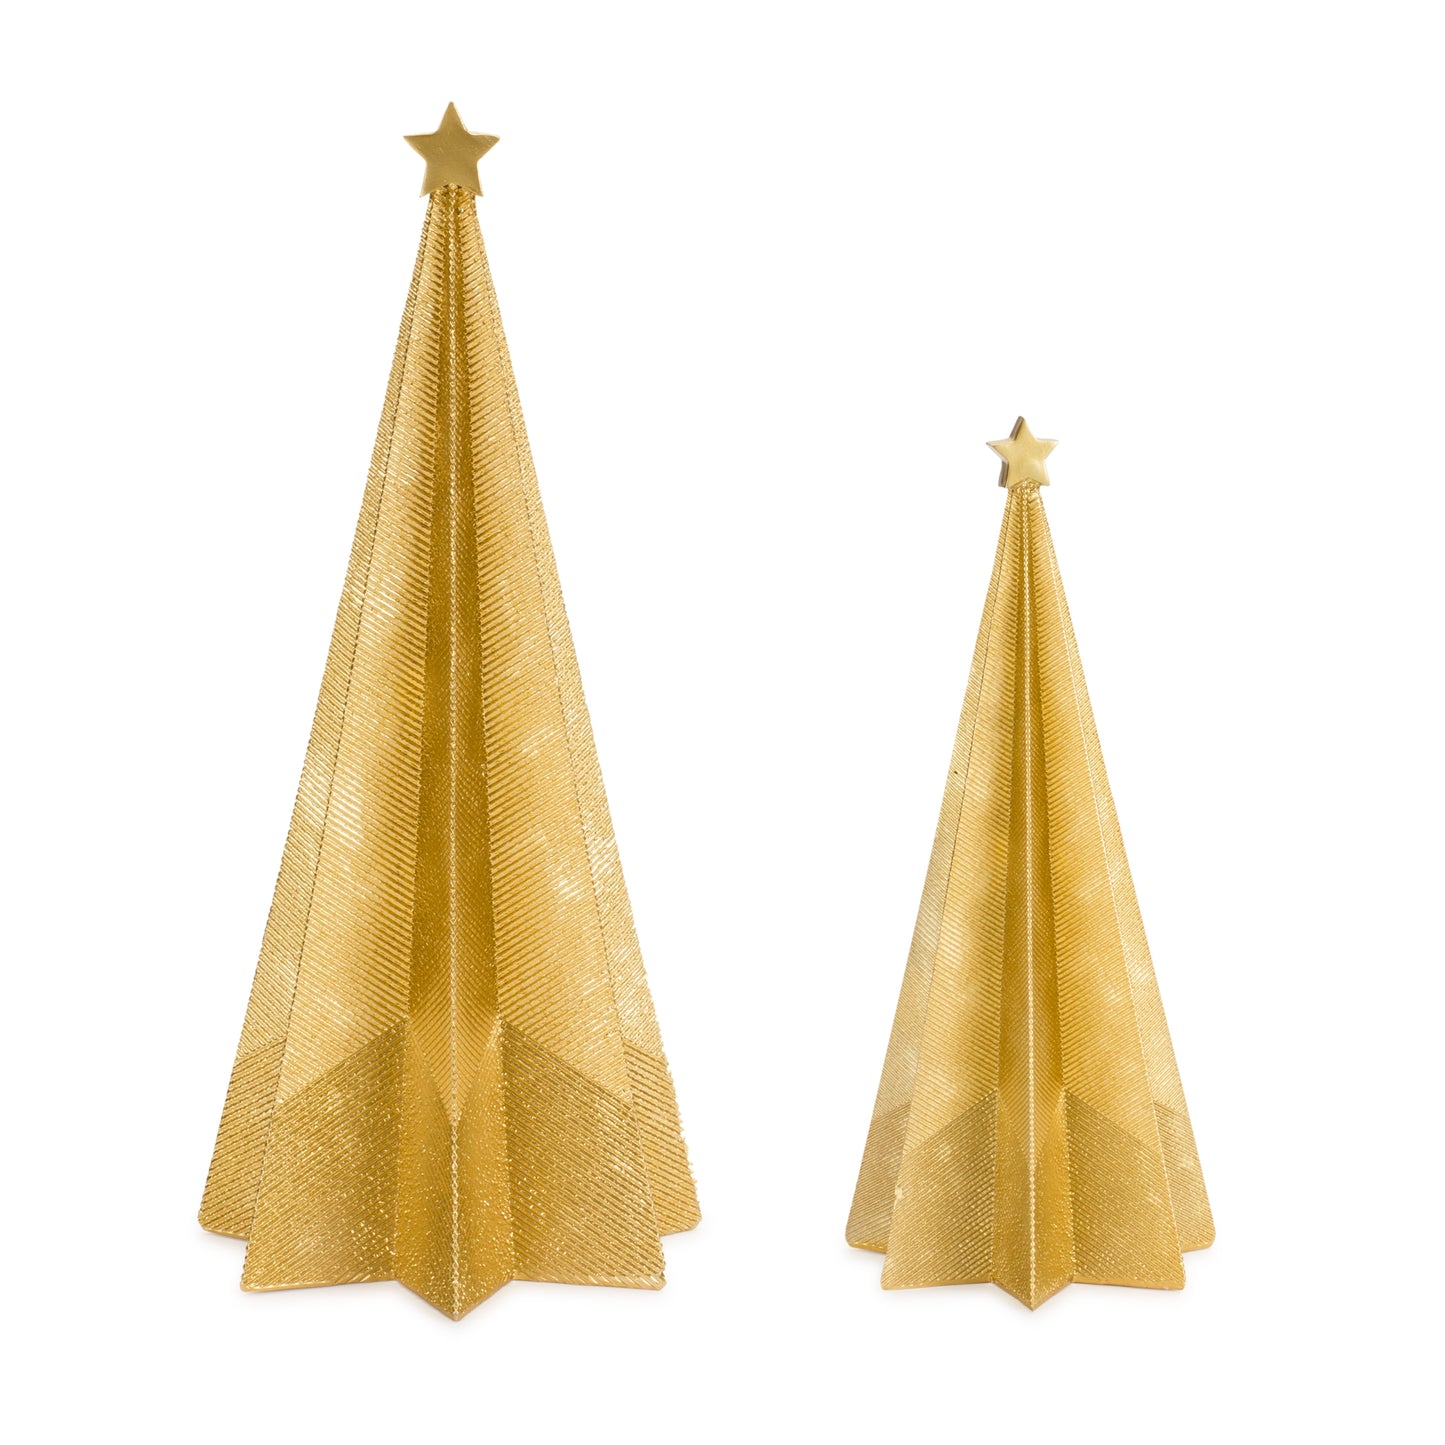 Modern Gold Holiday Tree Décor with Etched Design (Set of 2)